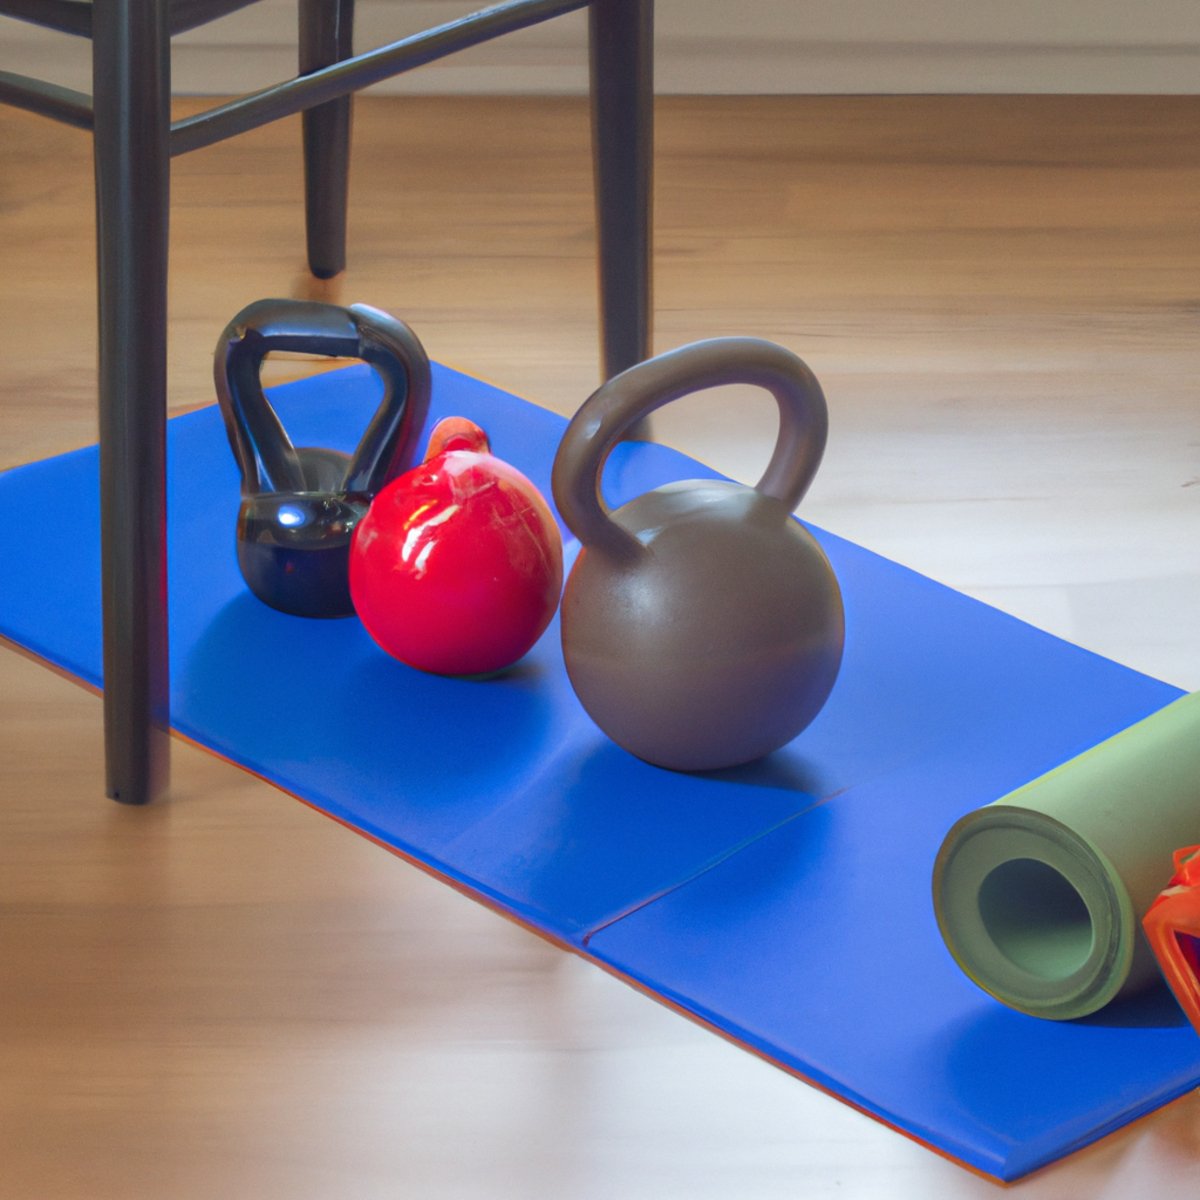 The photo shows a set of dumbbells, a resistance band, a yoga mat, a stability ball, and a kettlebell arranged neatly on a wooden floor. The dumbbells are of different weights, ranging from light to heavy, and the resistance band is stretched out between two chairs. The yoga mat is rolled up and placed next to the stability ball, which is inflated and ready for use. The kettlebell is placed on top of the stability ball, adding an extra challenge to the workout. The lighting is bright and natural, highlighting the textures and colors of the objects. The photo captures the essence of resistance training, showcasing the tools needed to tone the body and burn fat effectively.